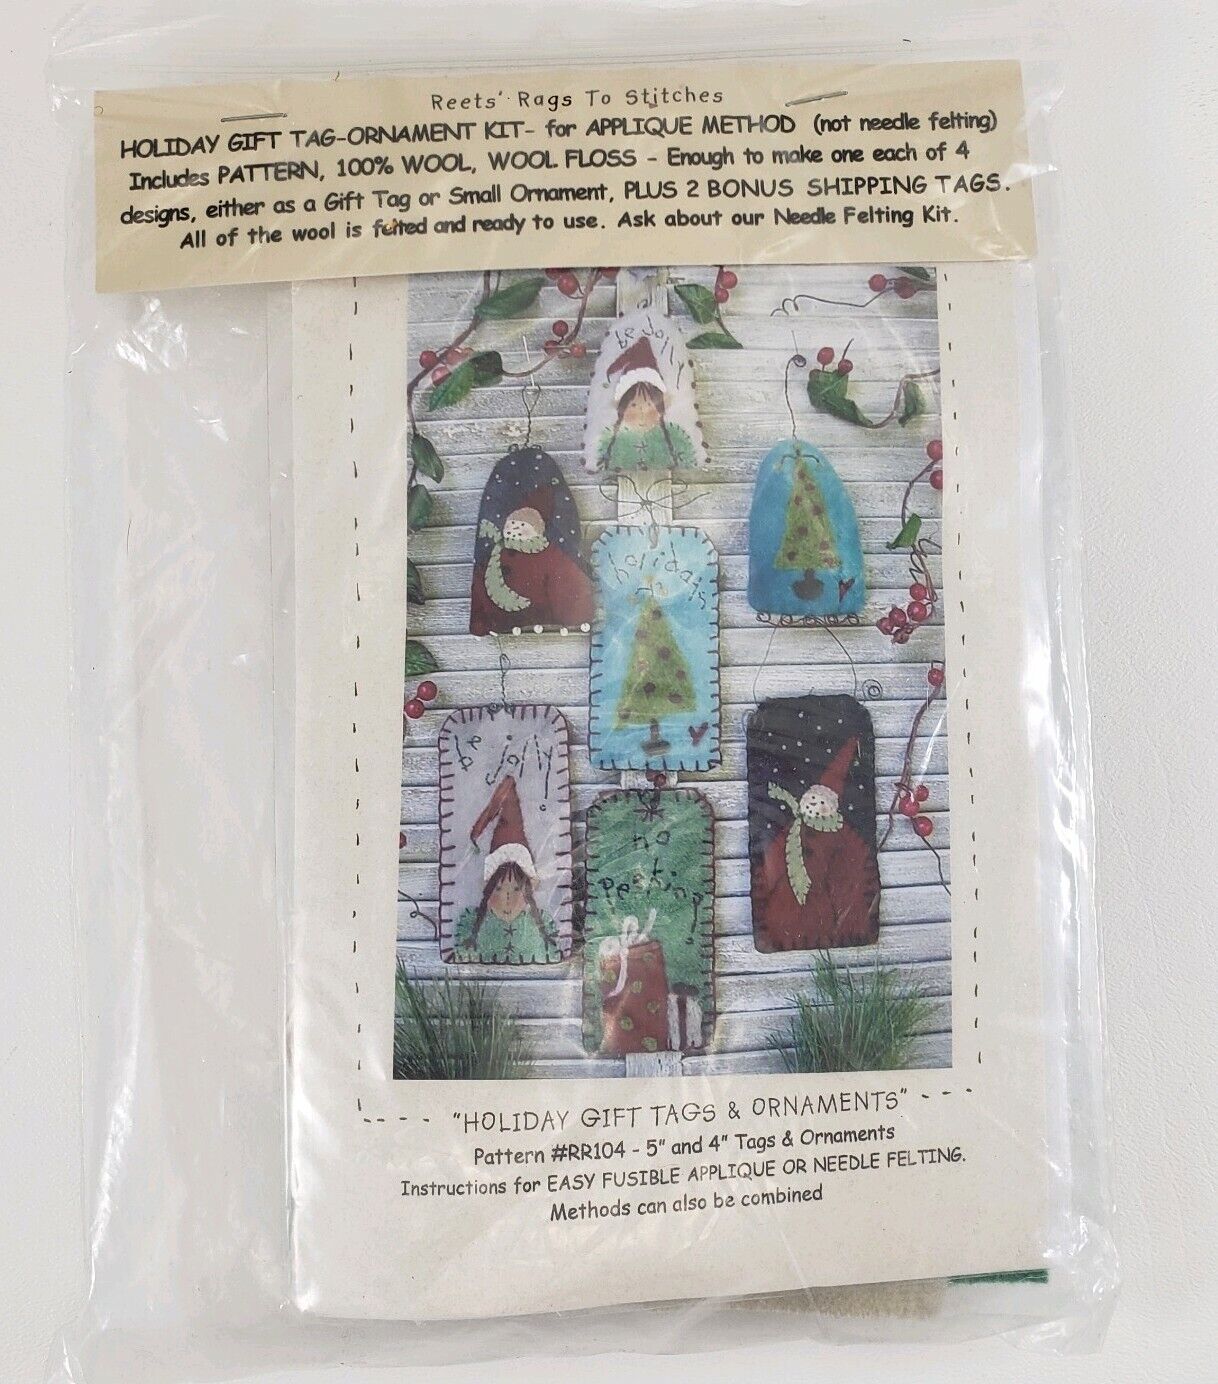 Reets Rags to Stitches Holiday Gift Tags  Ornaments Kit Applique Felt